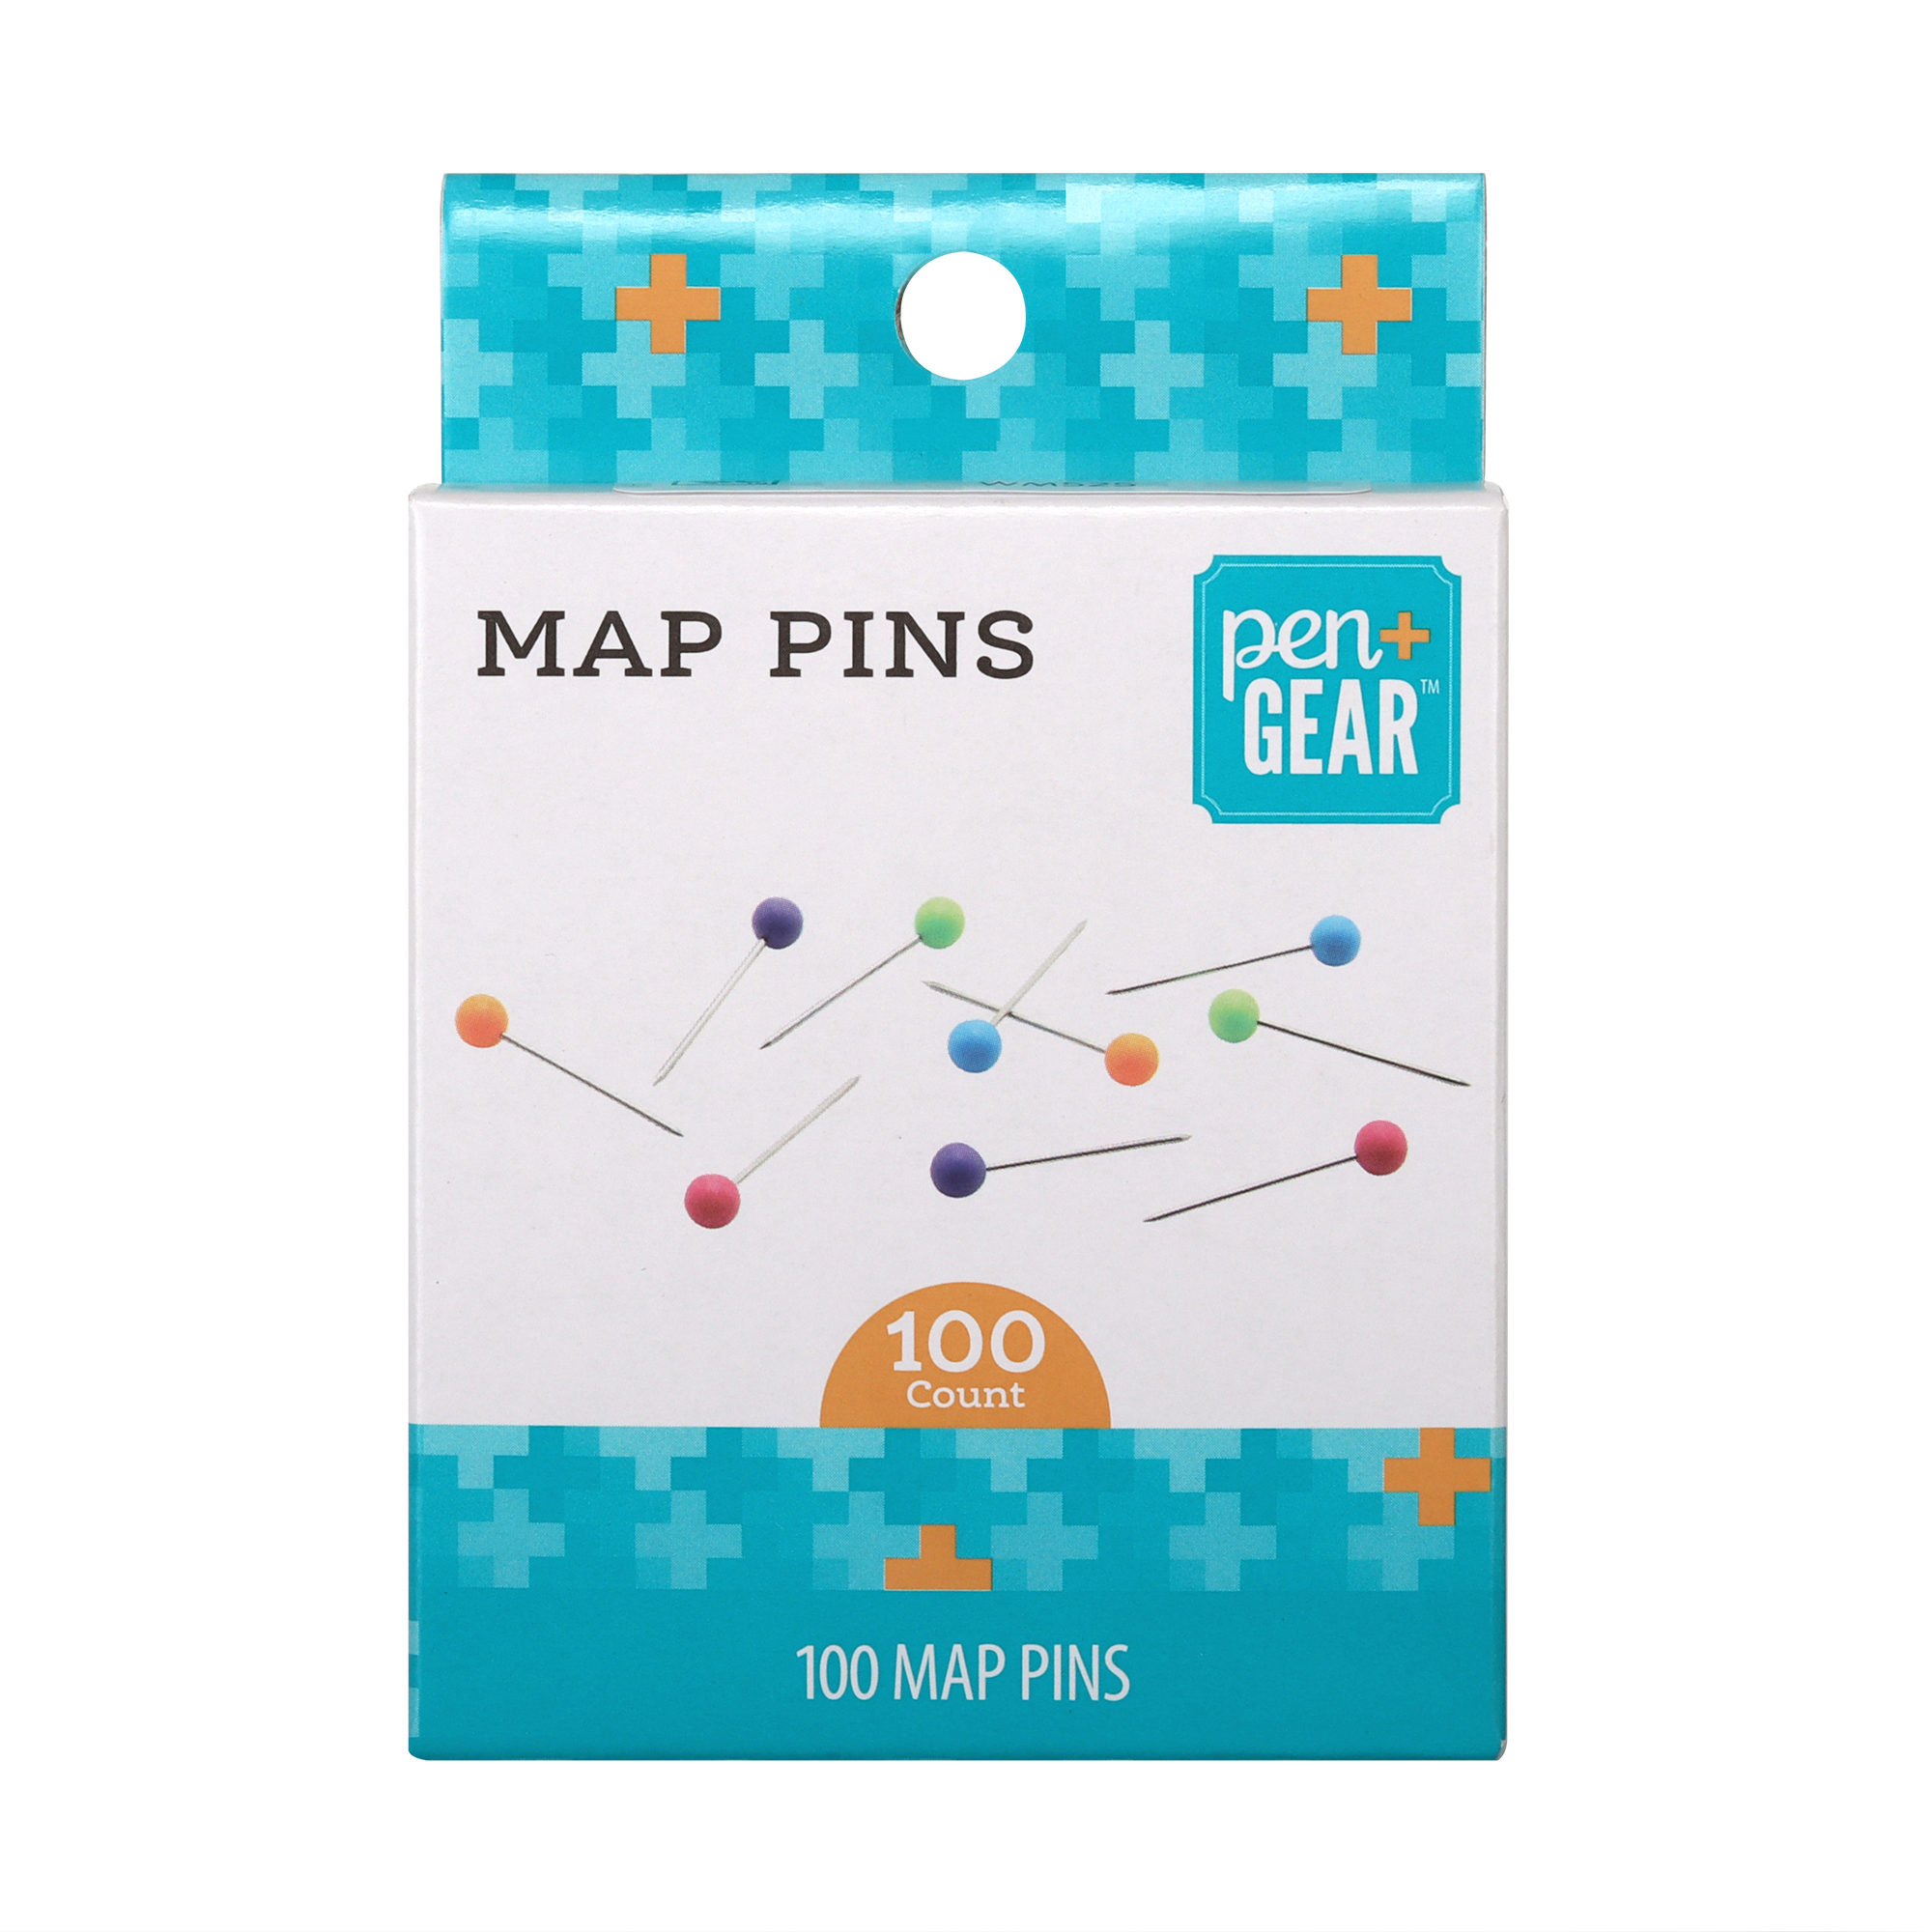 Pen + Gear Map Pins, Multiple Colors, Plastic and Steel,100 Count - image 1 of 9